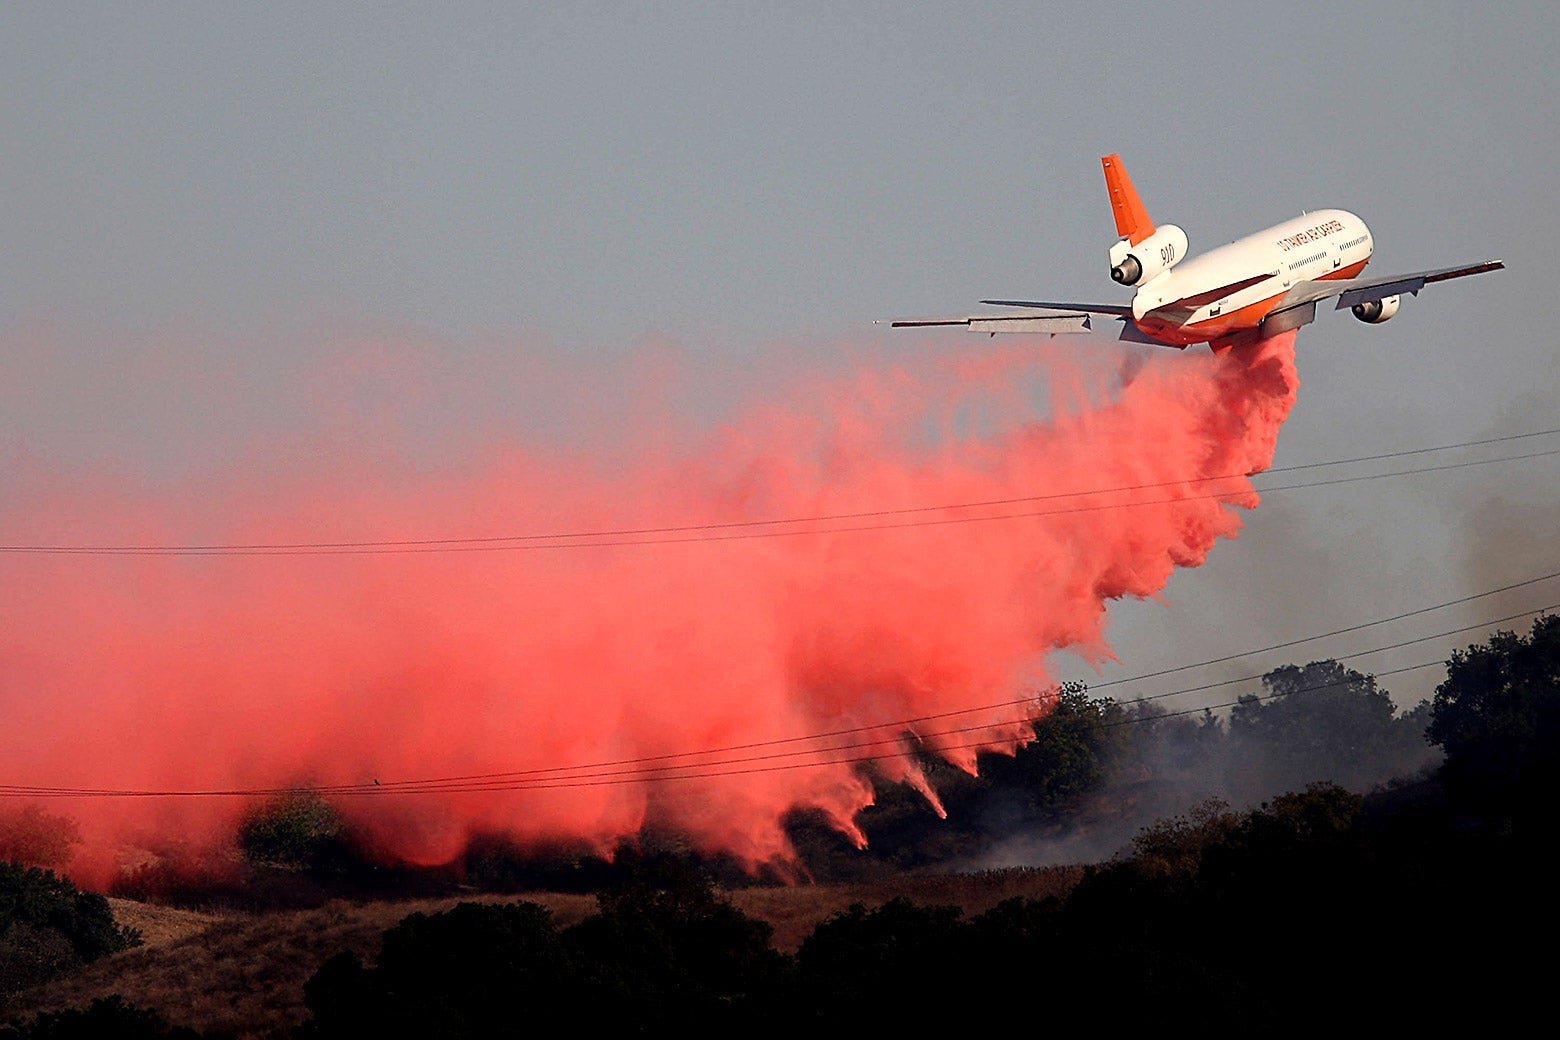 A plane leaves behind it a trail of red smoke.